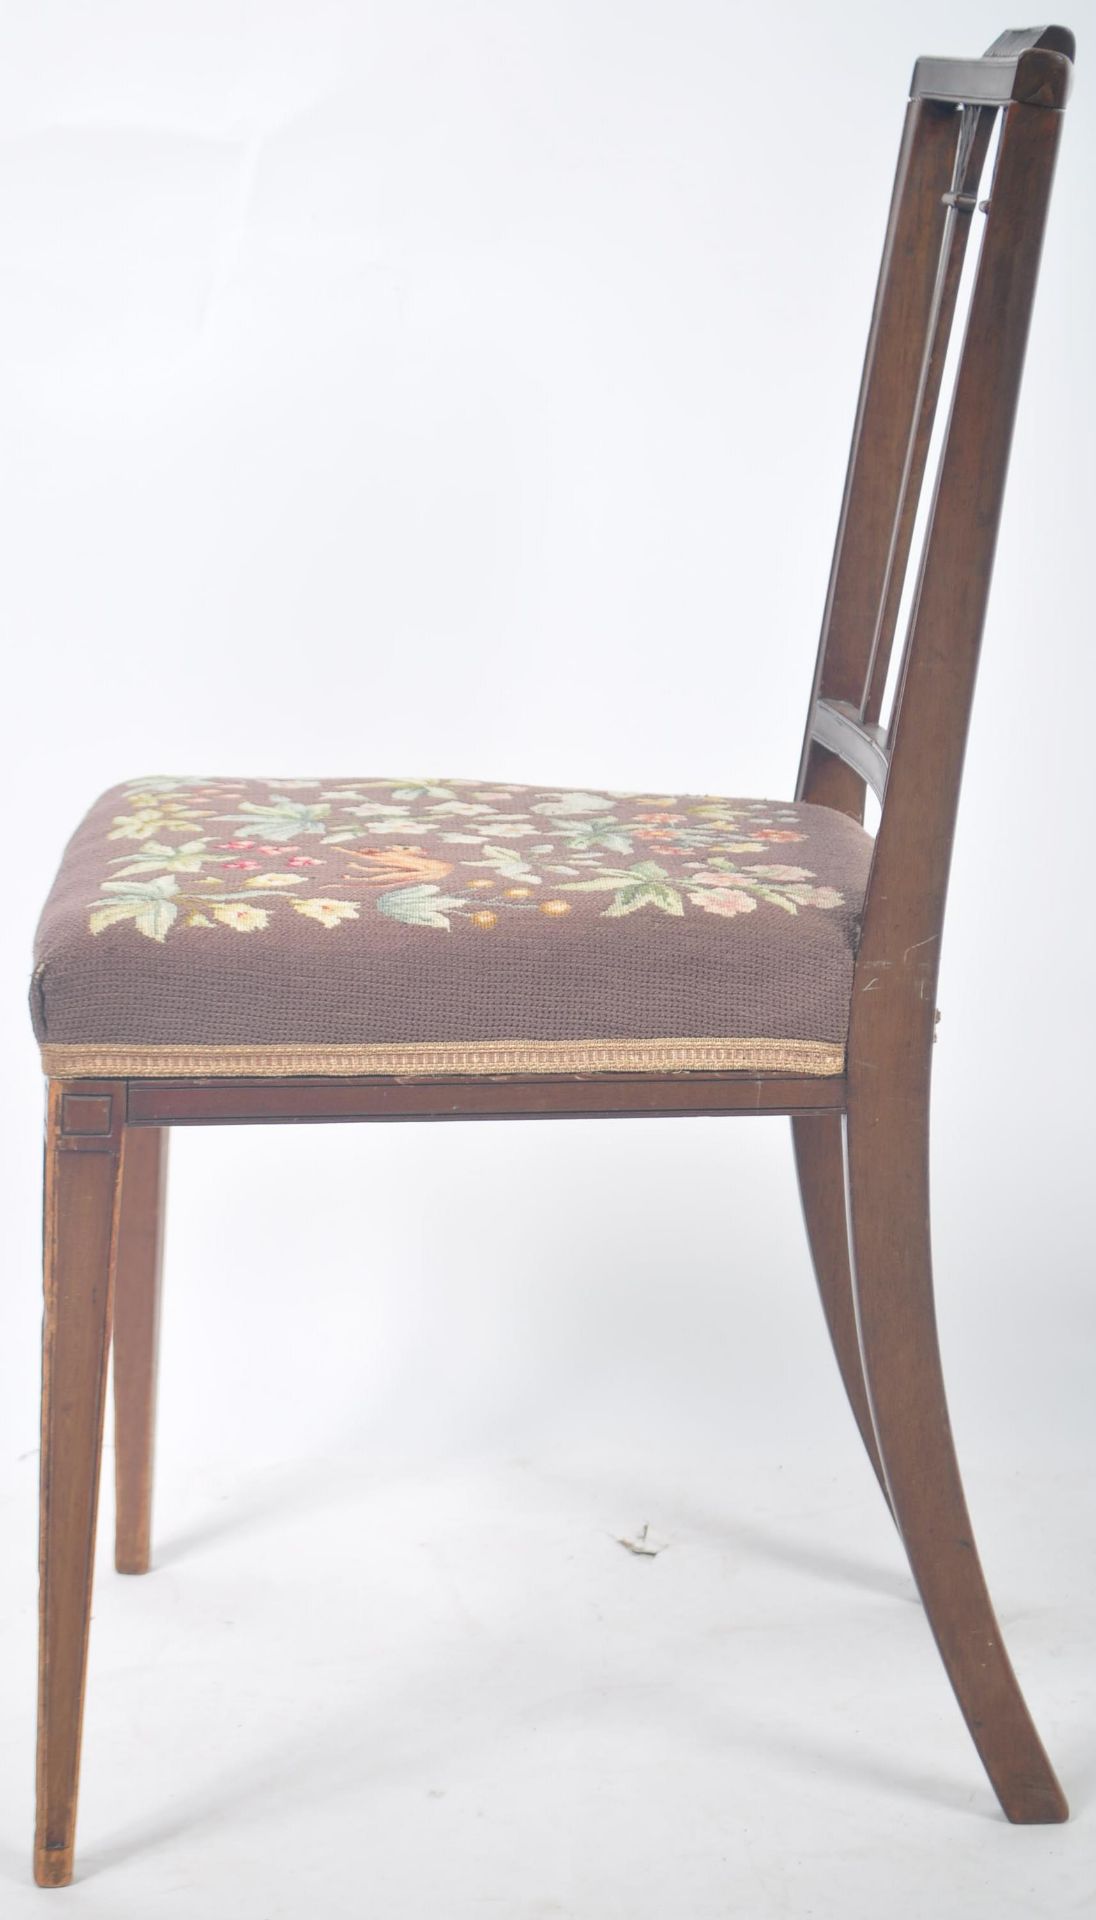 19TH CENTURY GEORGIAN MAHOGANY & TAPESTRY DINING CHAIR - Image 7 of 8